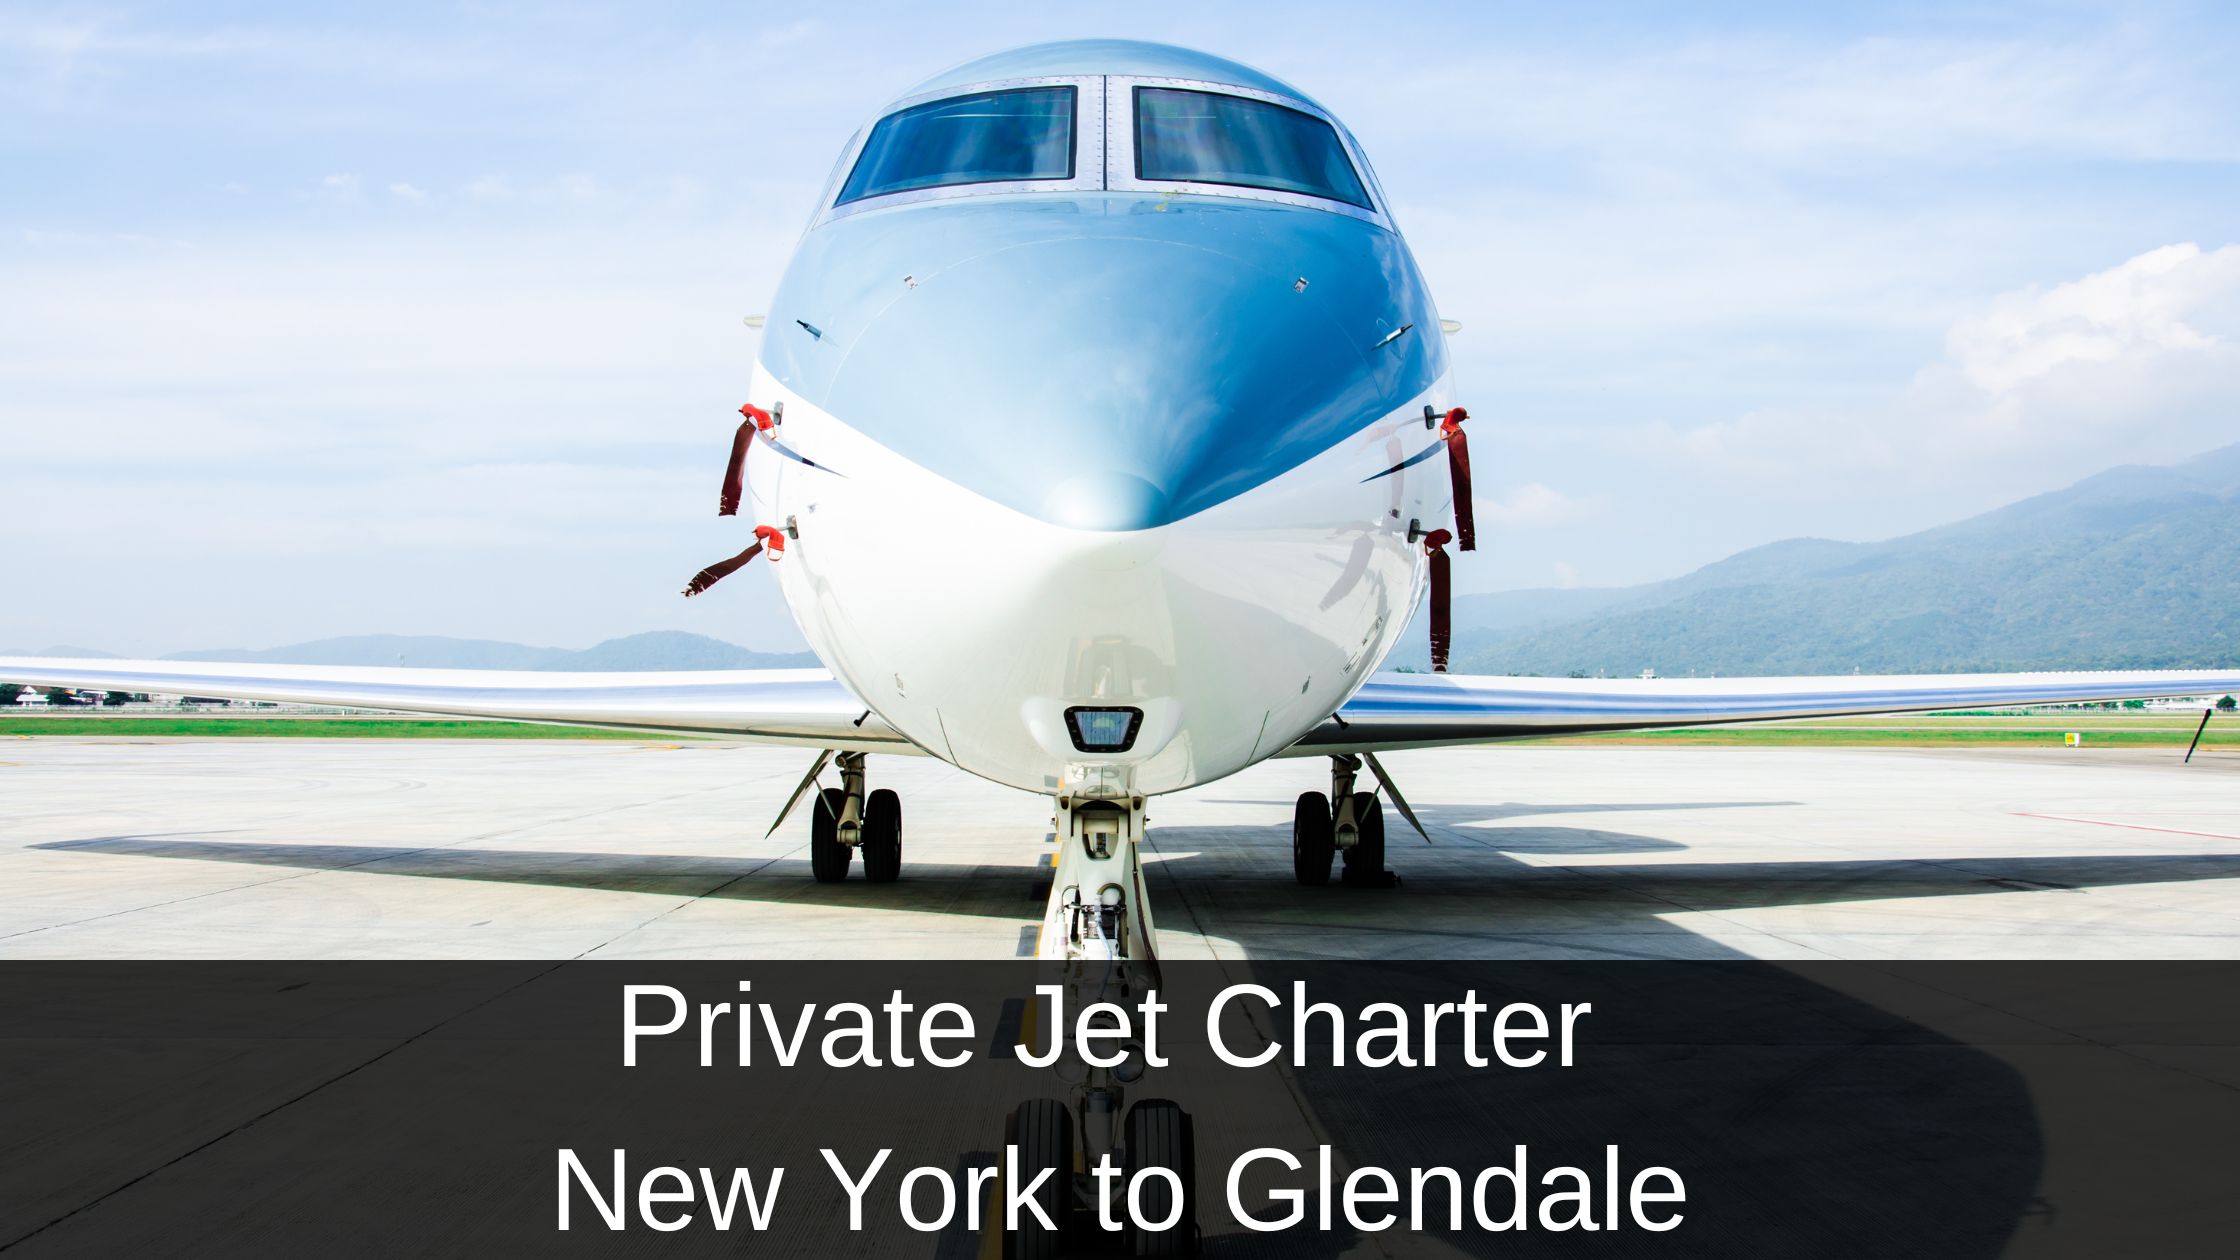 Private Jet Charter from New York to Glendale